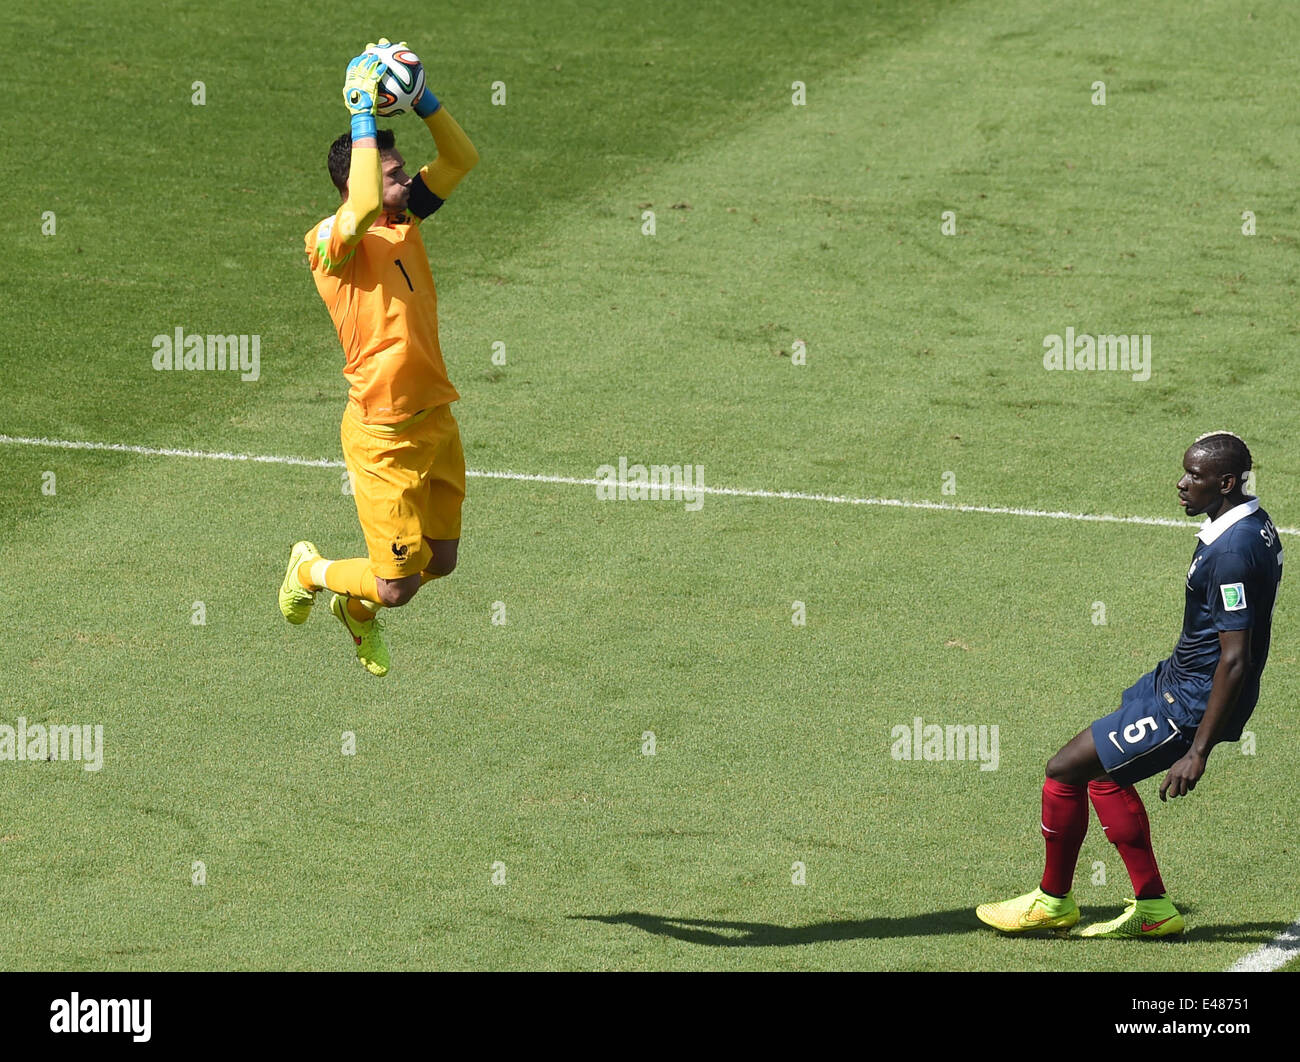 Rio de Janeiro, Brazil. 04th July, 2014. Goalkeeper Hugo Lloris (L) of France catches a ball next to Mamadou Sakho of France during the FIFA World Cup 2014 quarter final soccer match between France and Germany at Estadio do Maracana in Rio de Janeiro, Brazil, 04 July 2014. Photo: Marcus Brandt/dpa/Alamy Live News Stock Photo